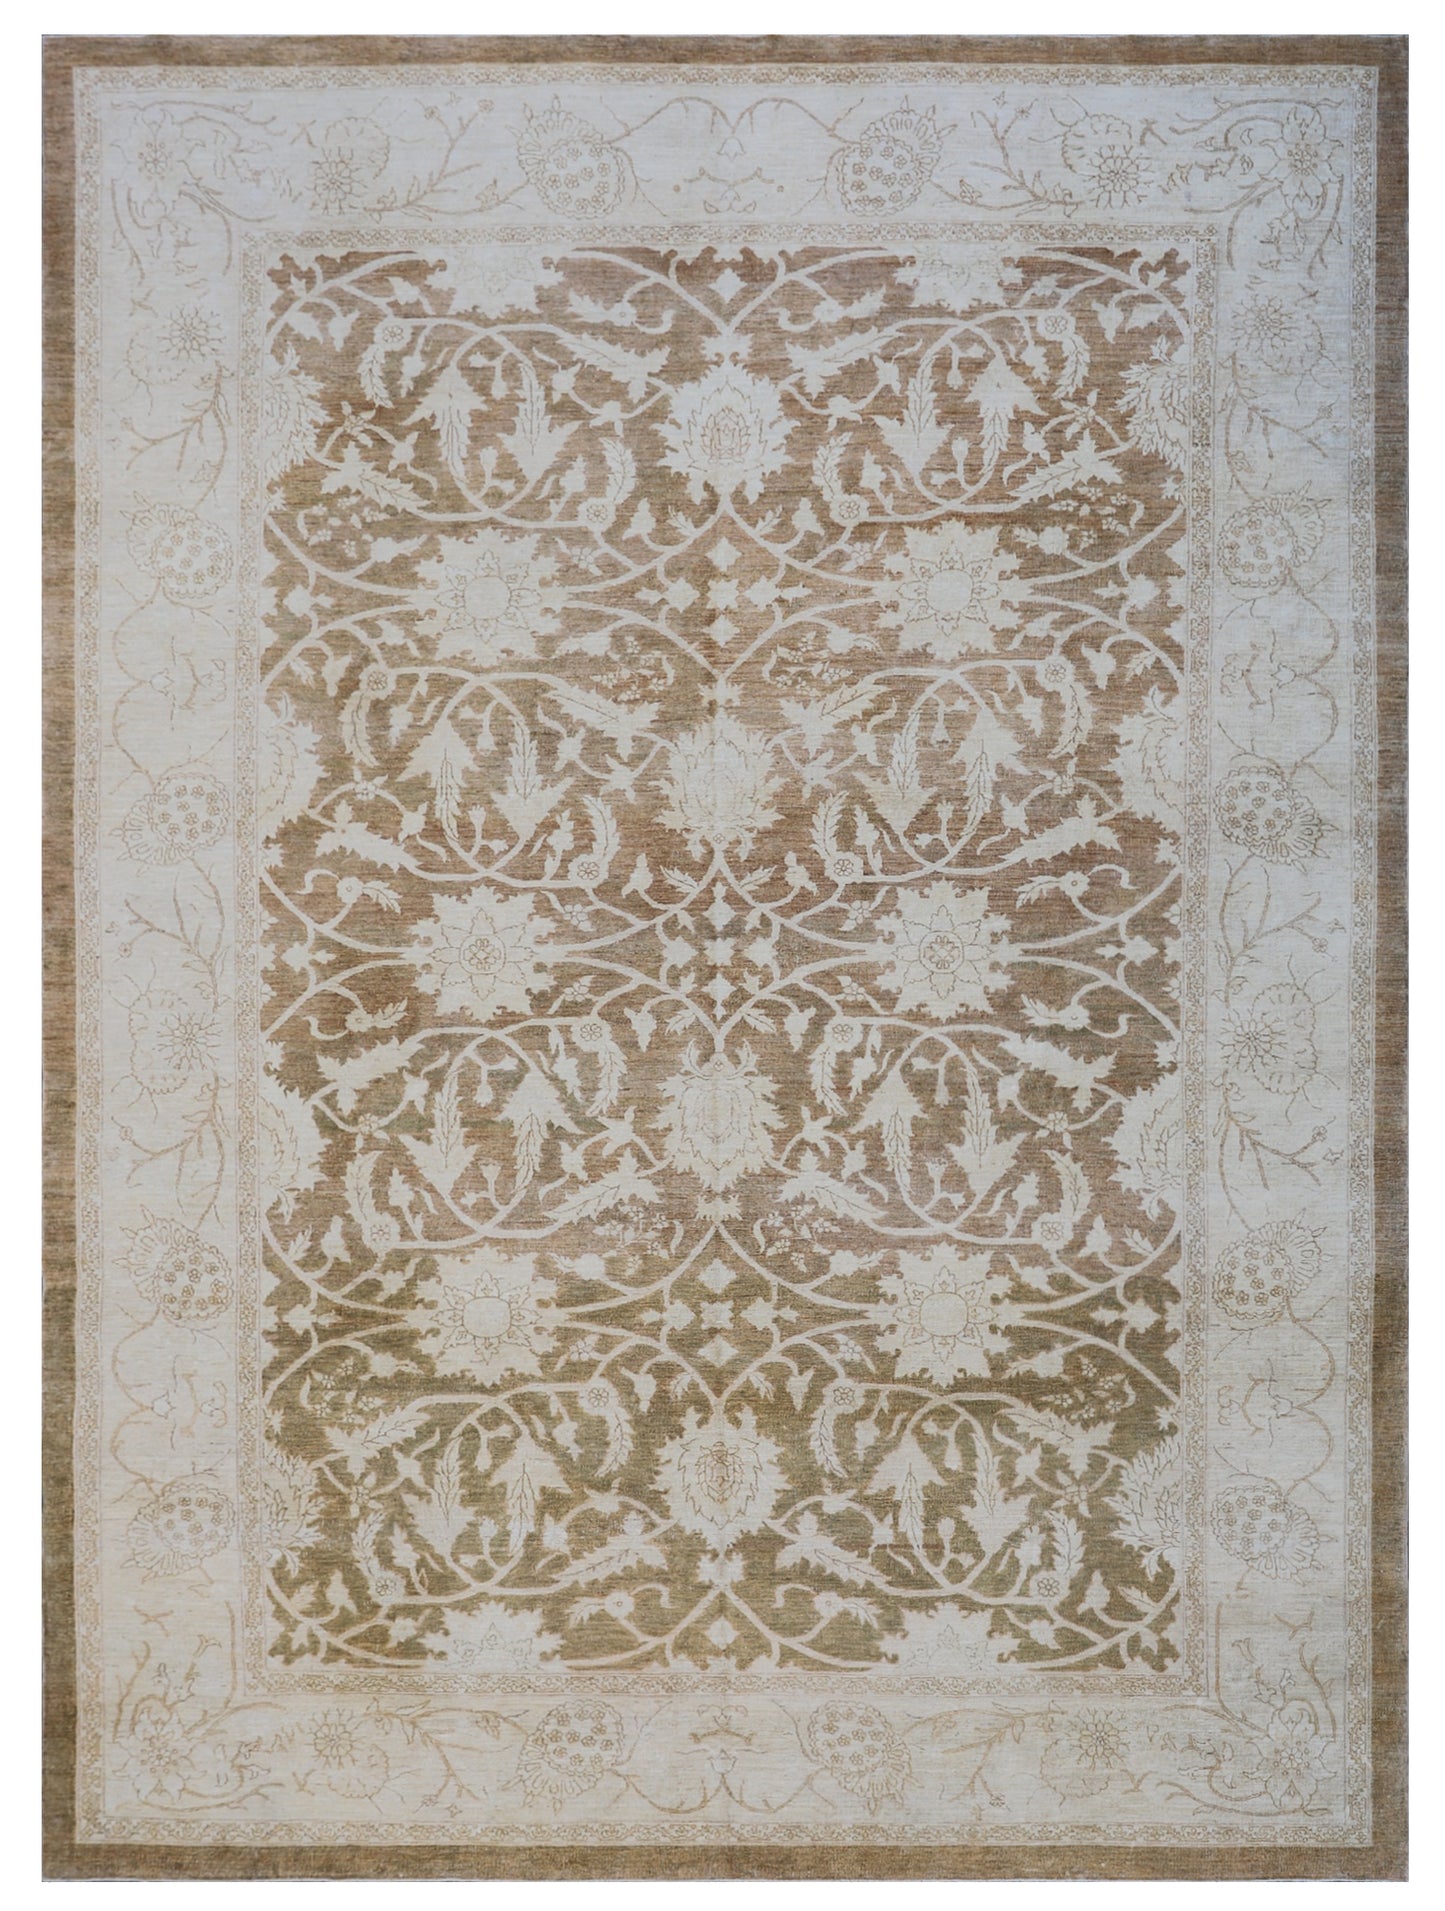 10'x14' Ariana Traditional Brown Ivory Rug